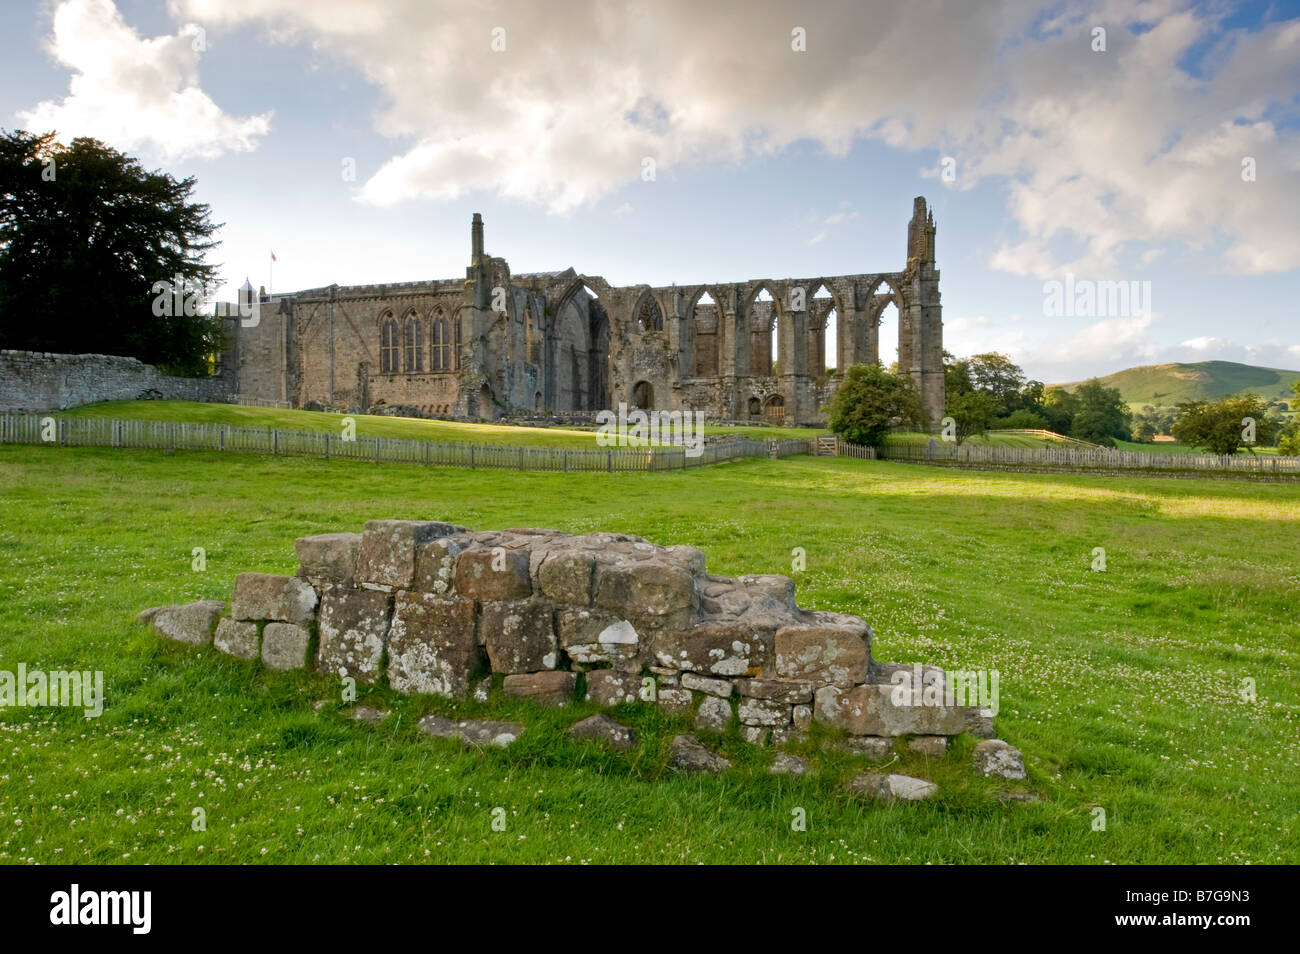 Summer view from south of ancient, picturesque monastic ruins of Bolton Abbey & priory church, in scenic countryside - Yorkshire Dales, England, UK. Stock Photo